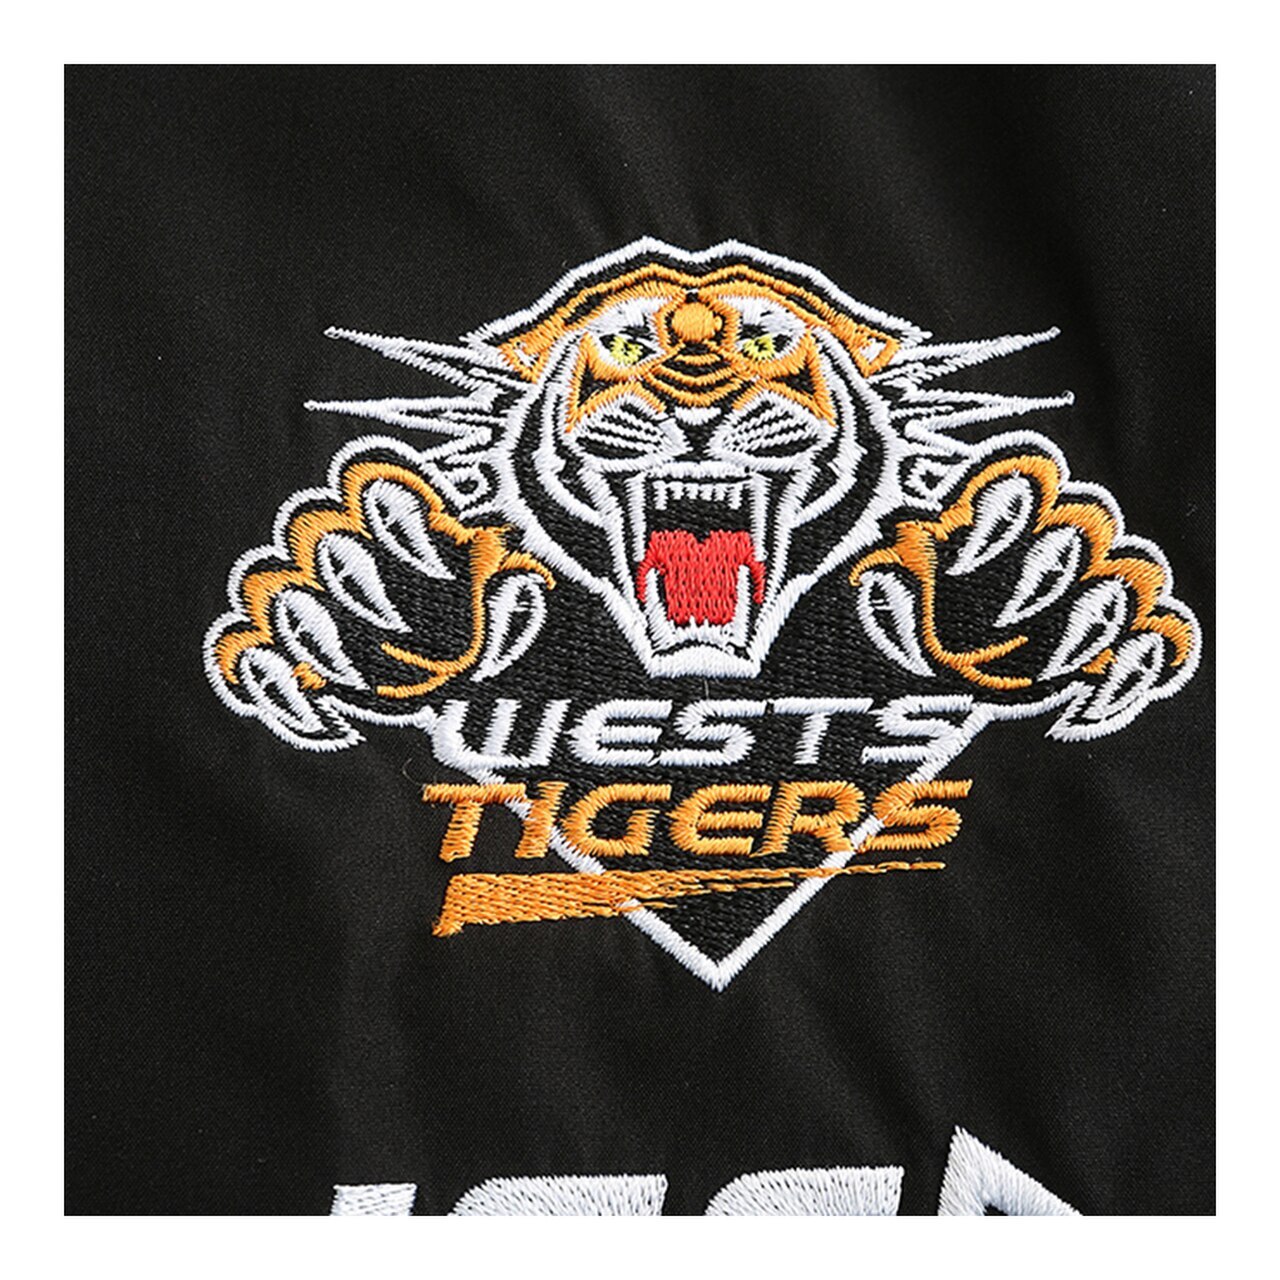 Wests Tigers NRL 2020 Players ISC Wet Weather Jacket Sizes S-5XL! 